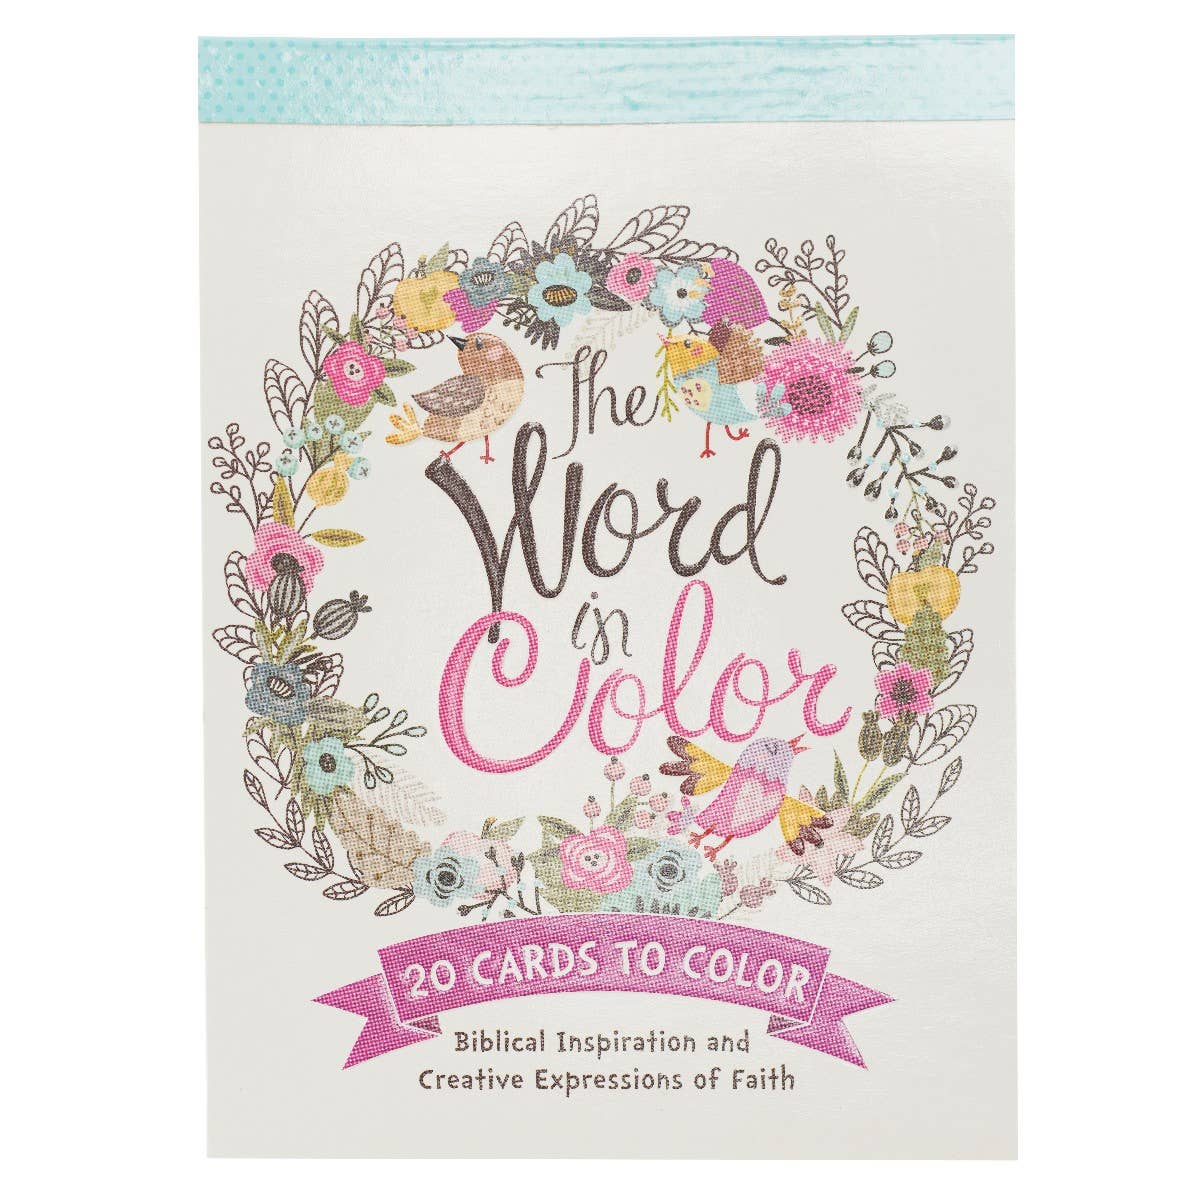 The Word in Color Coloring Postcards